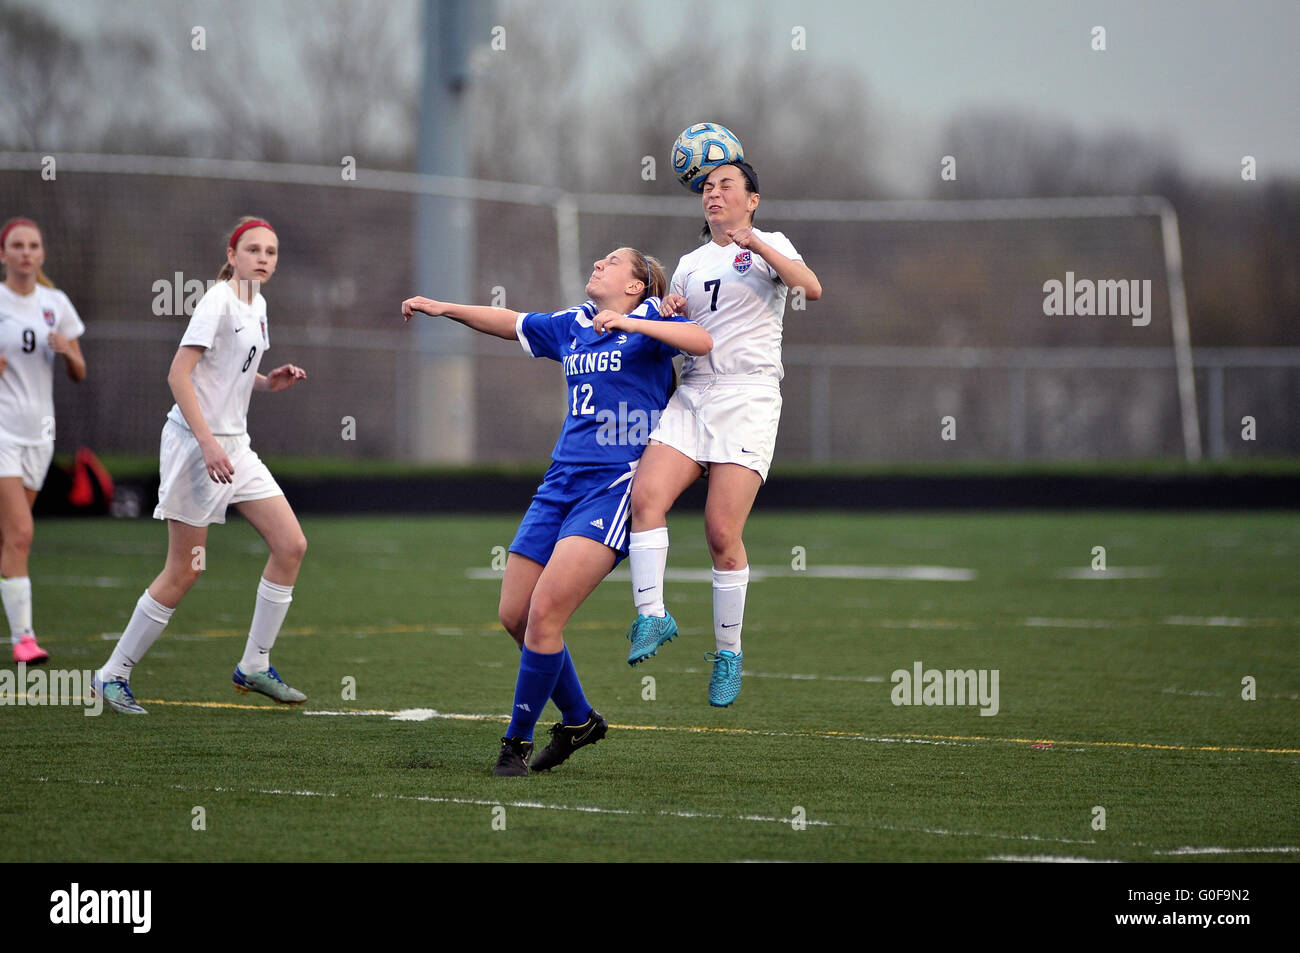 A player rising above the turf and an opponent to execute a header during a high school soccer match. USA. Stock Photo